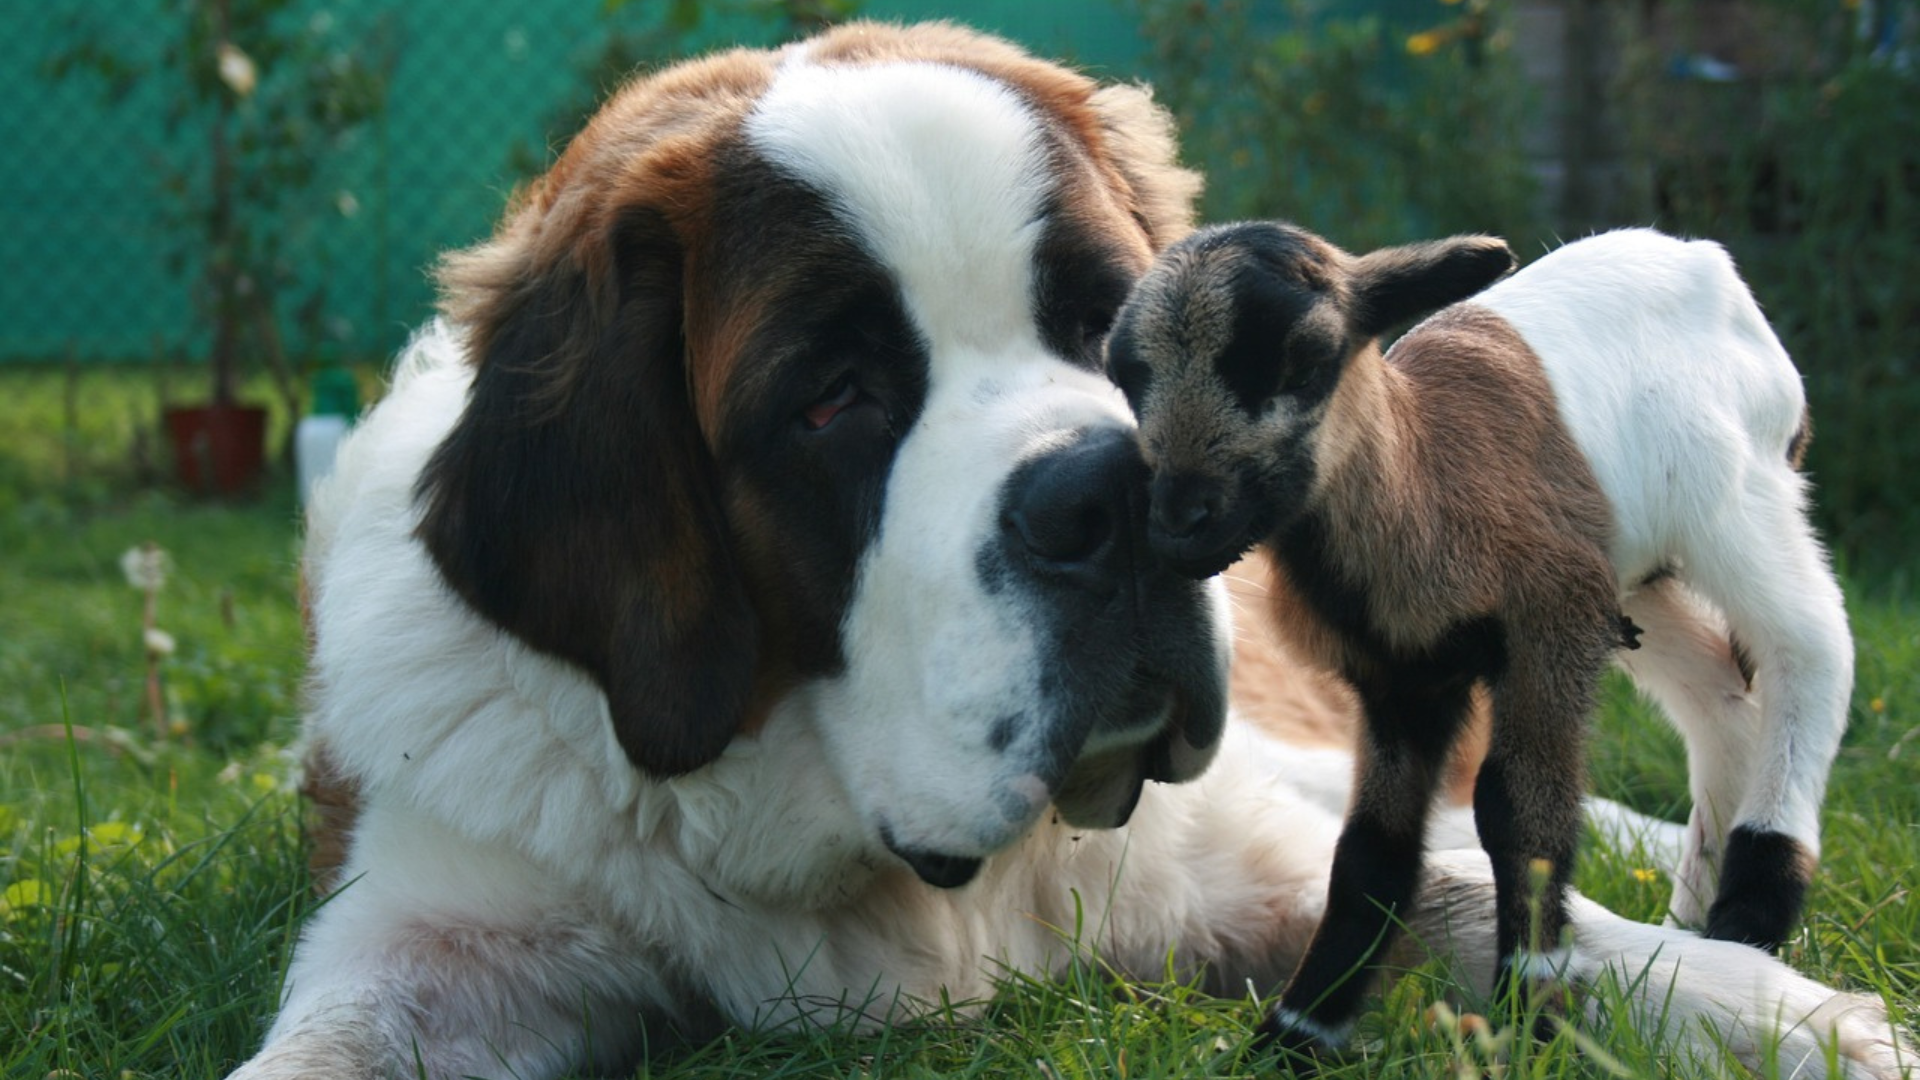 Are St. Bernards Good for New Pet Owners